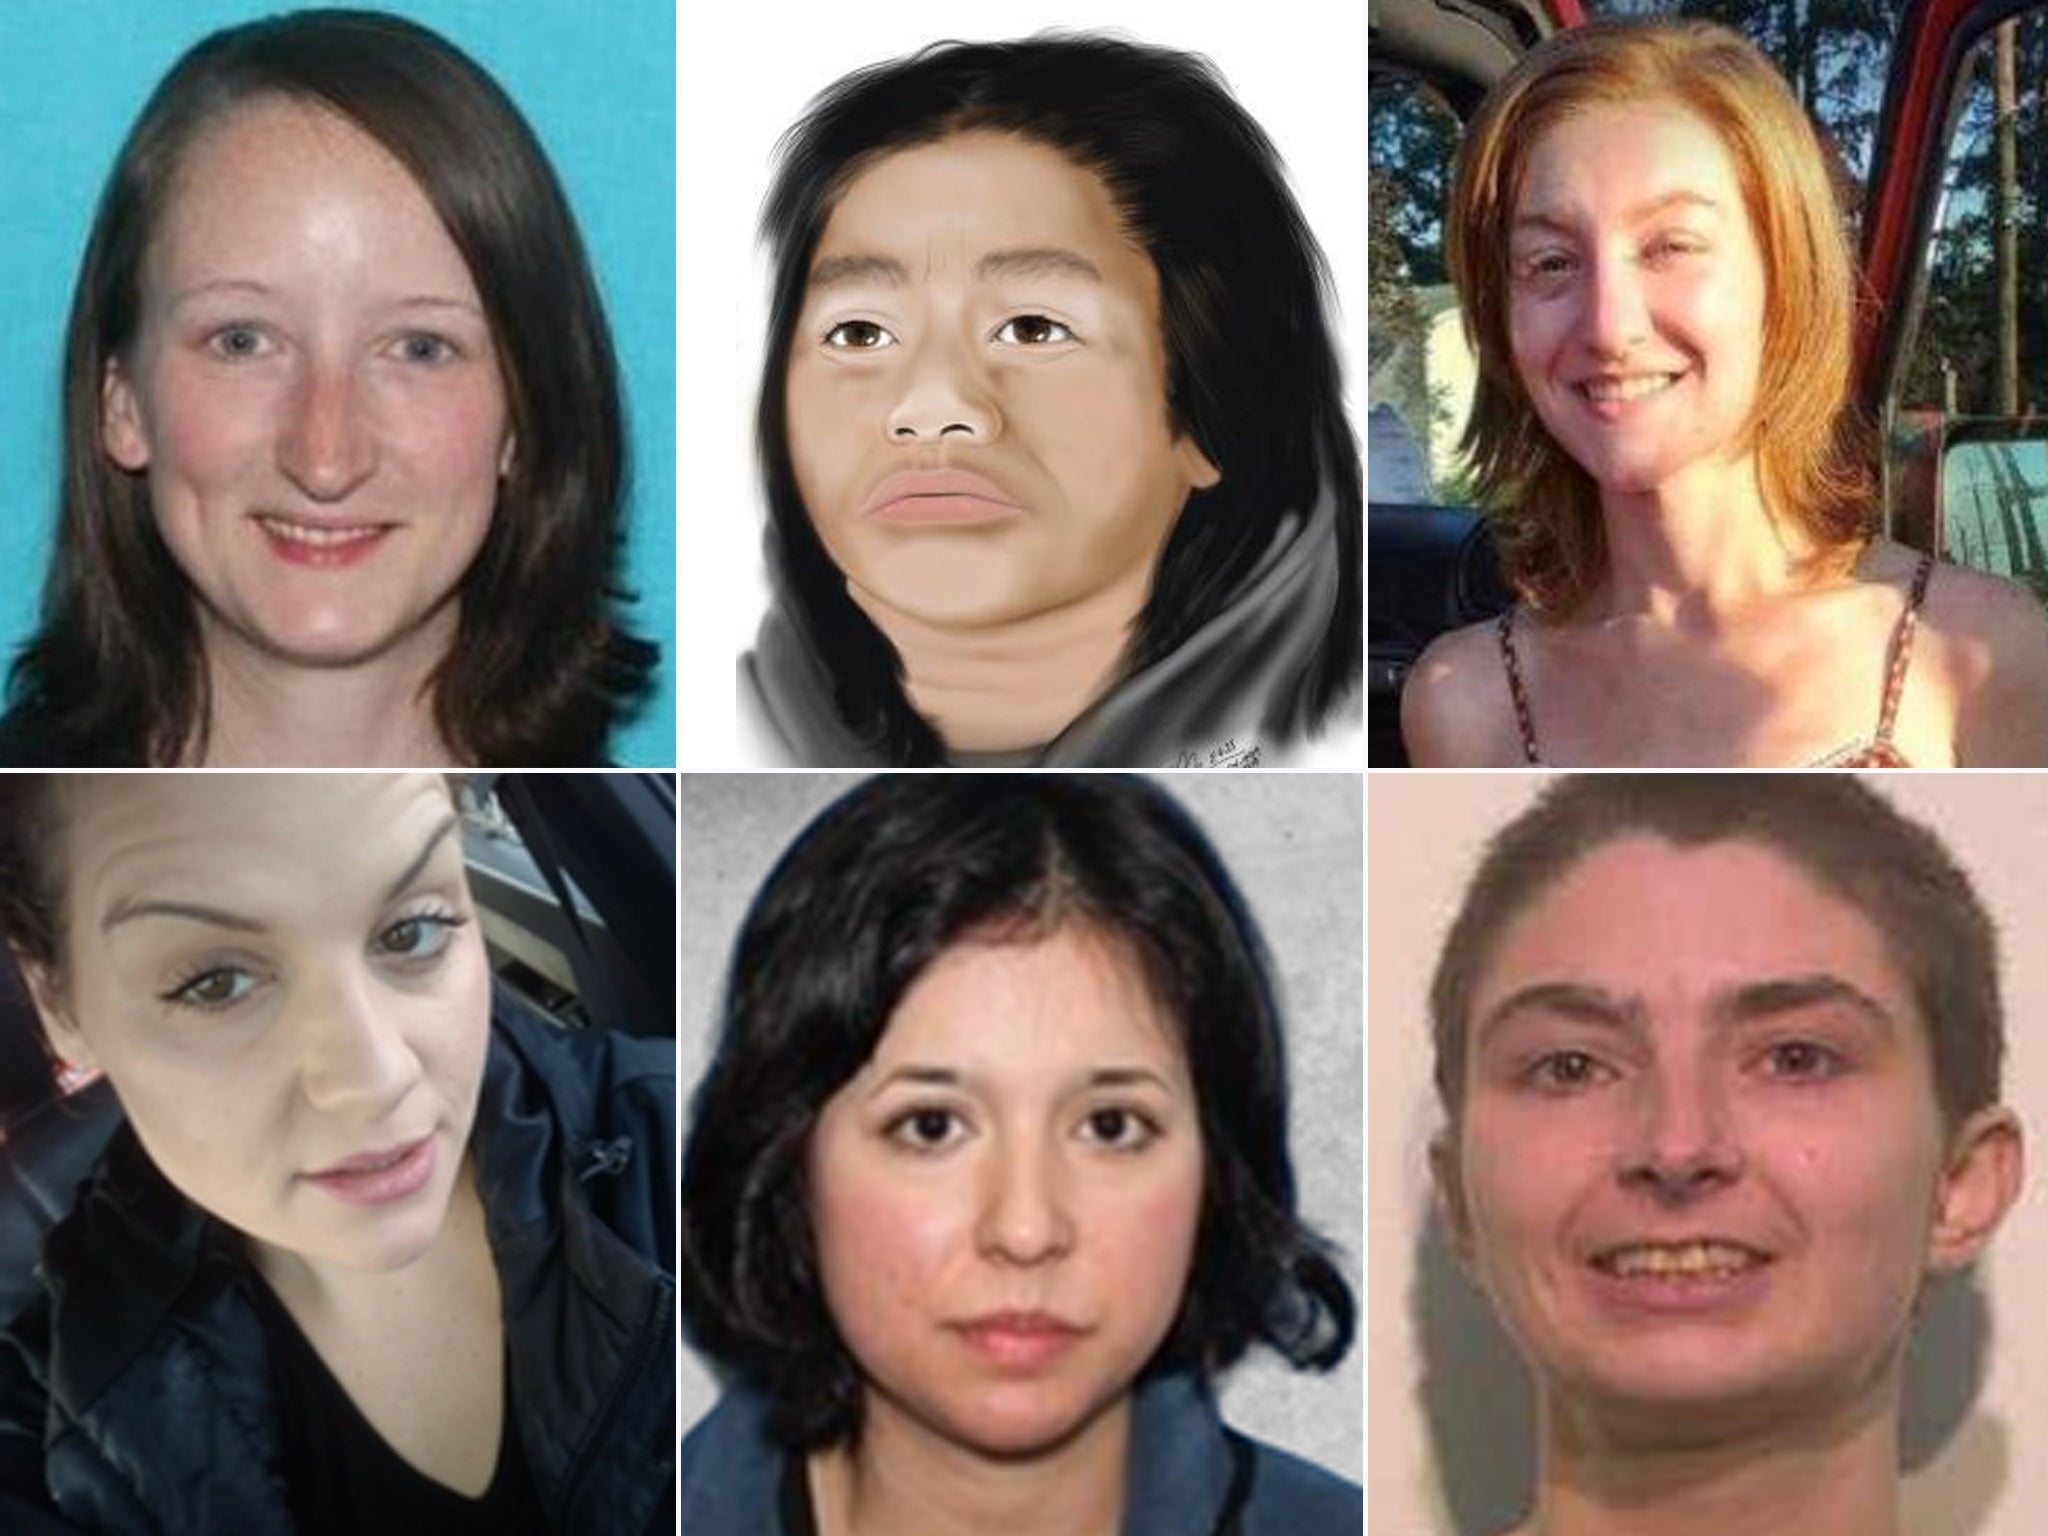 The remains of six women have been found over the last four months in the Portland area